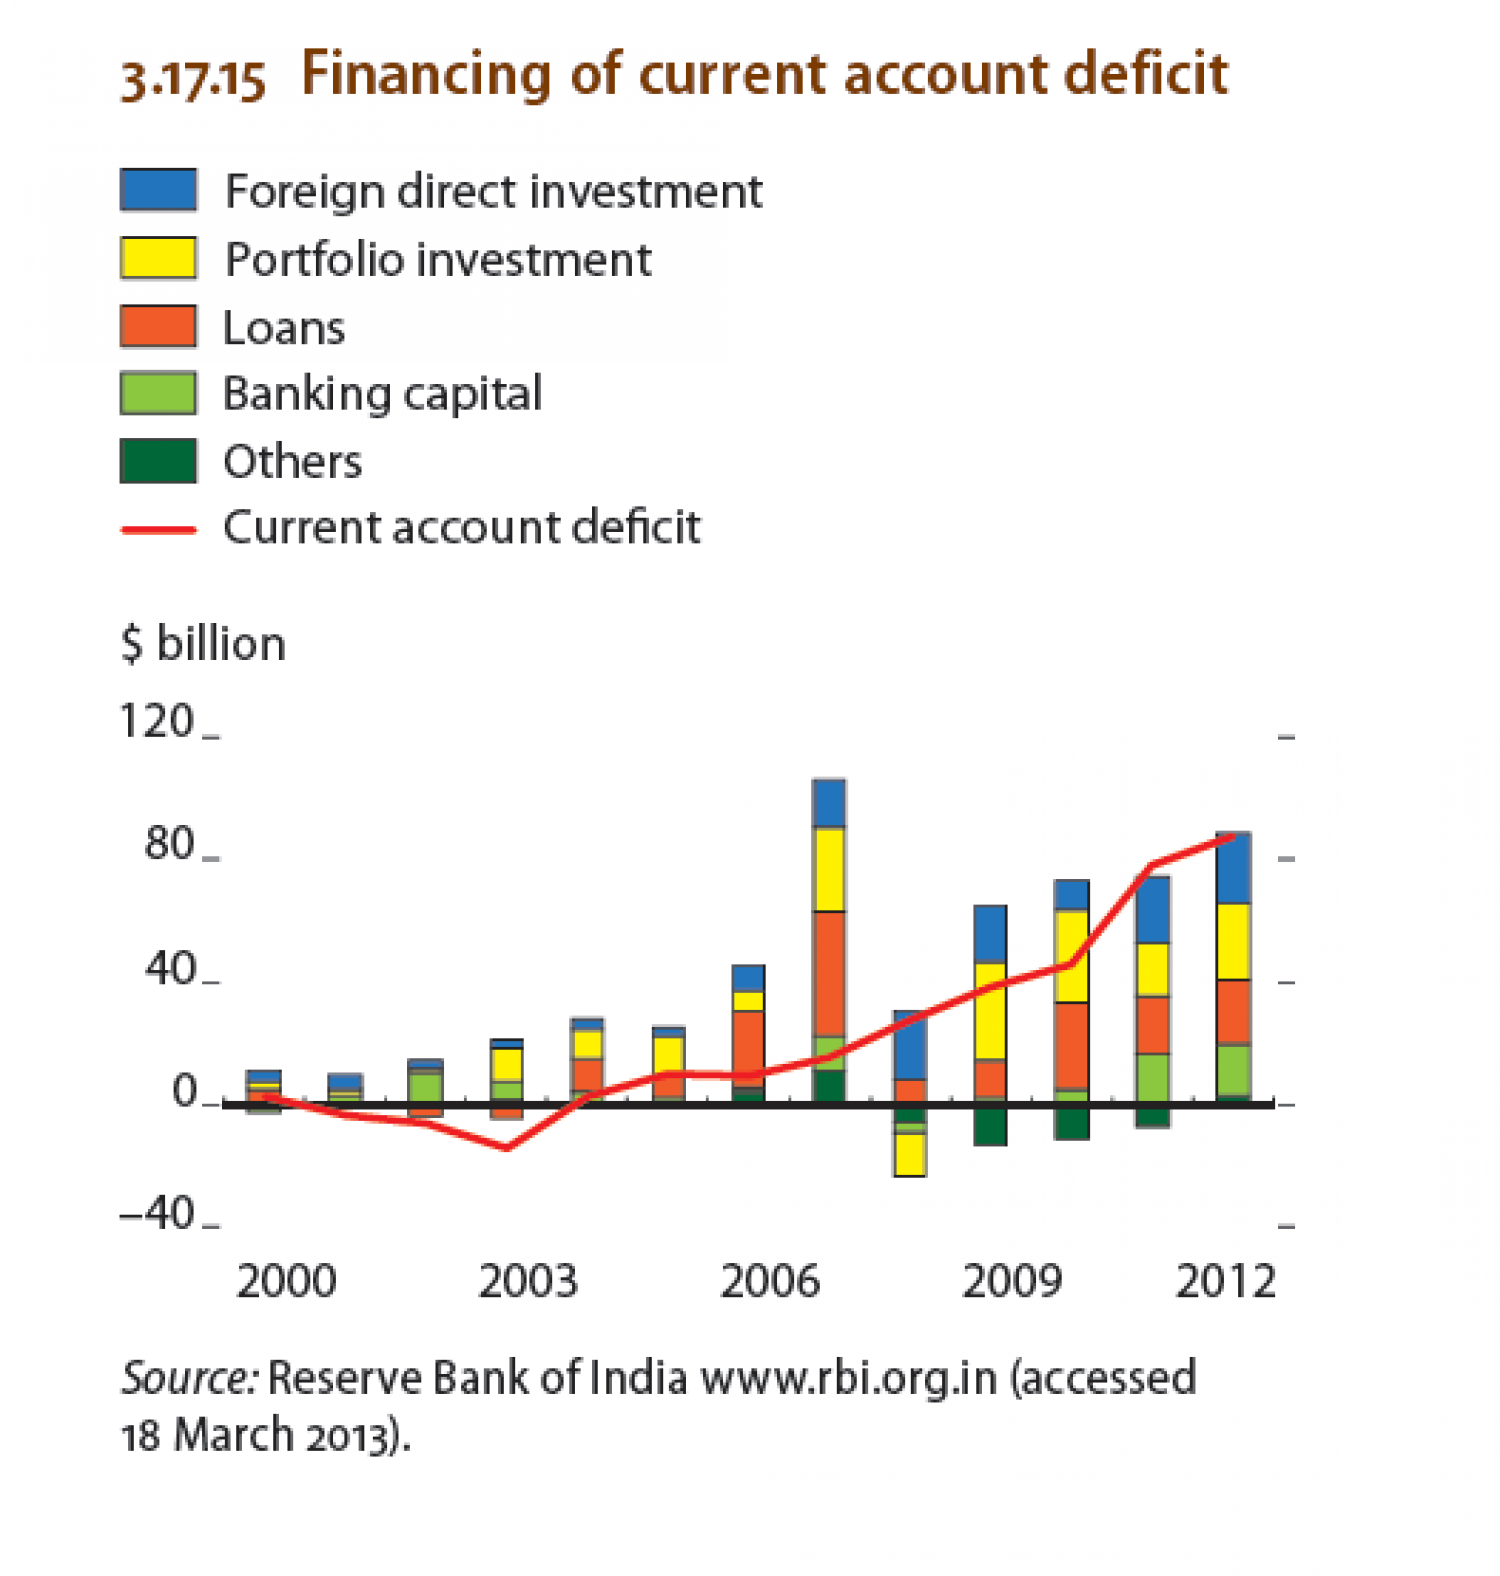 India - Financing of current account deficit Infographic